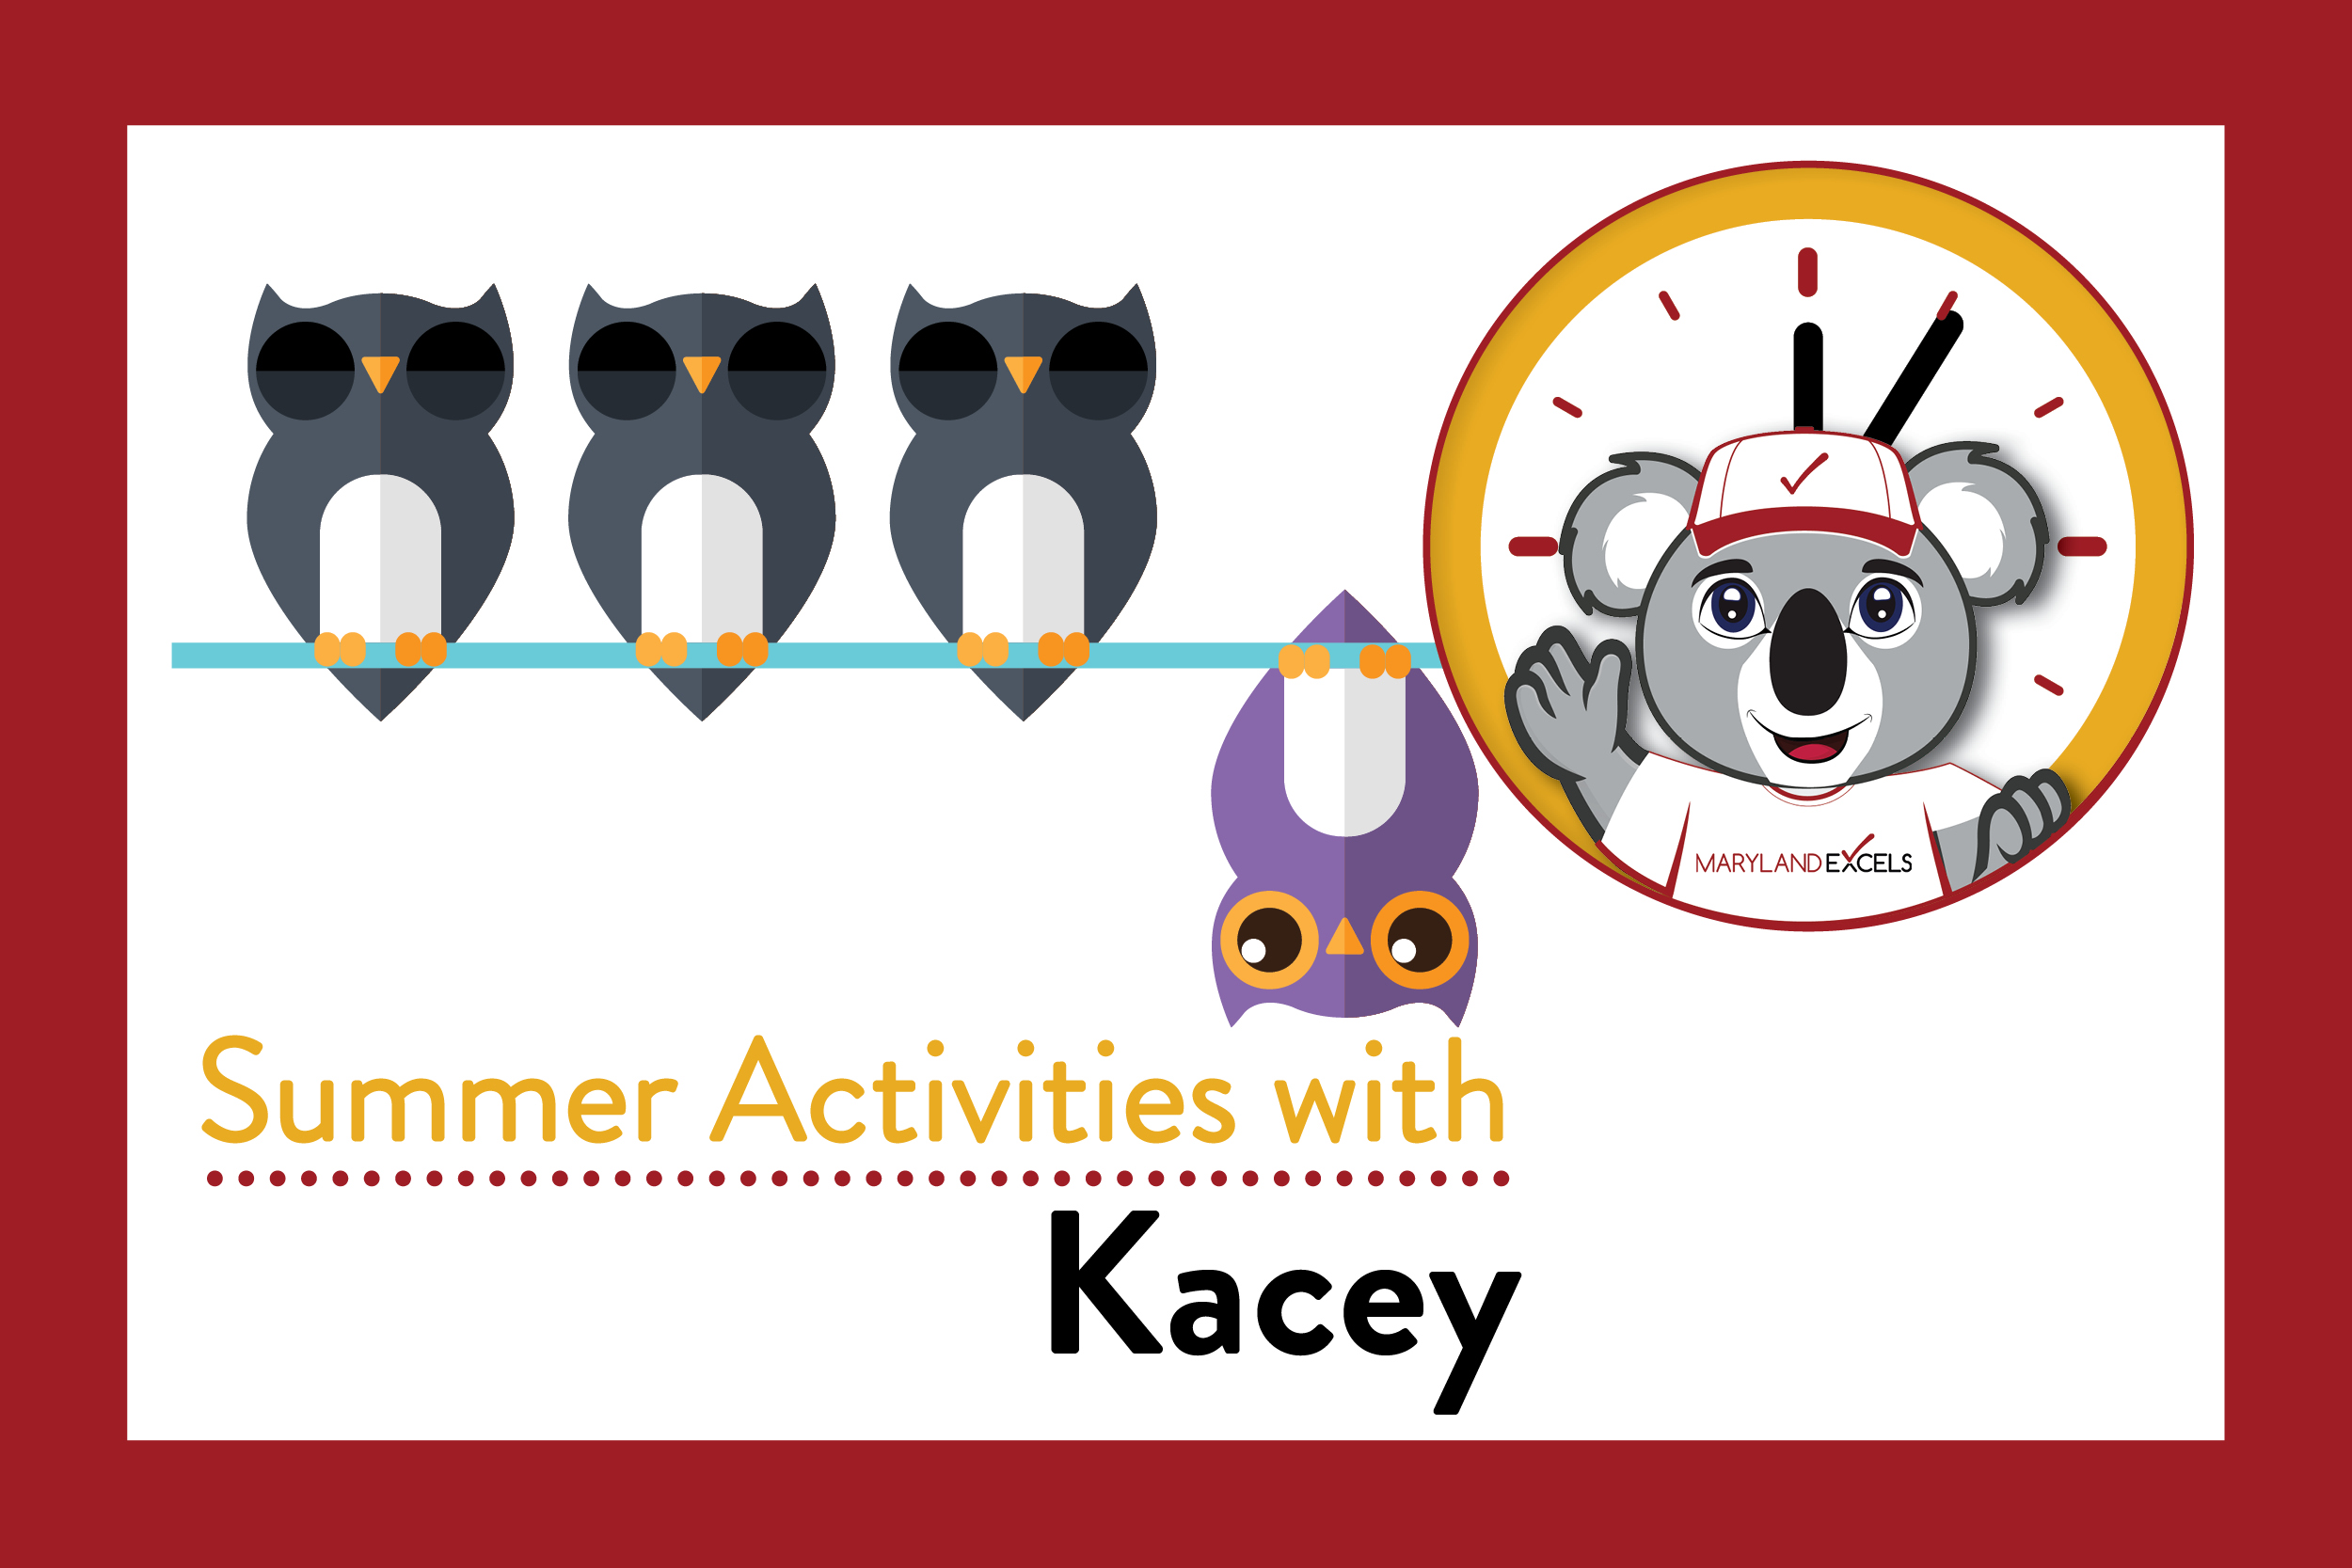 Summer Activities with Kacey